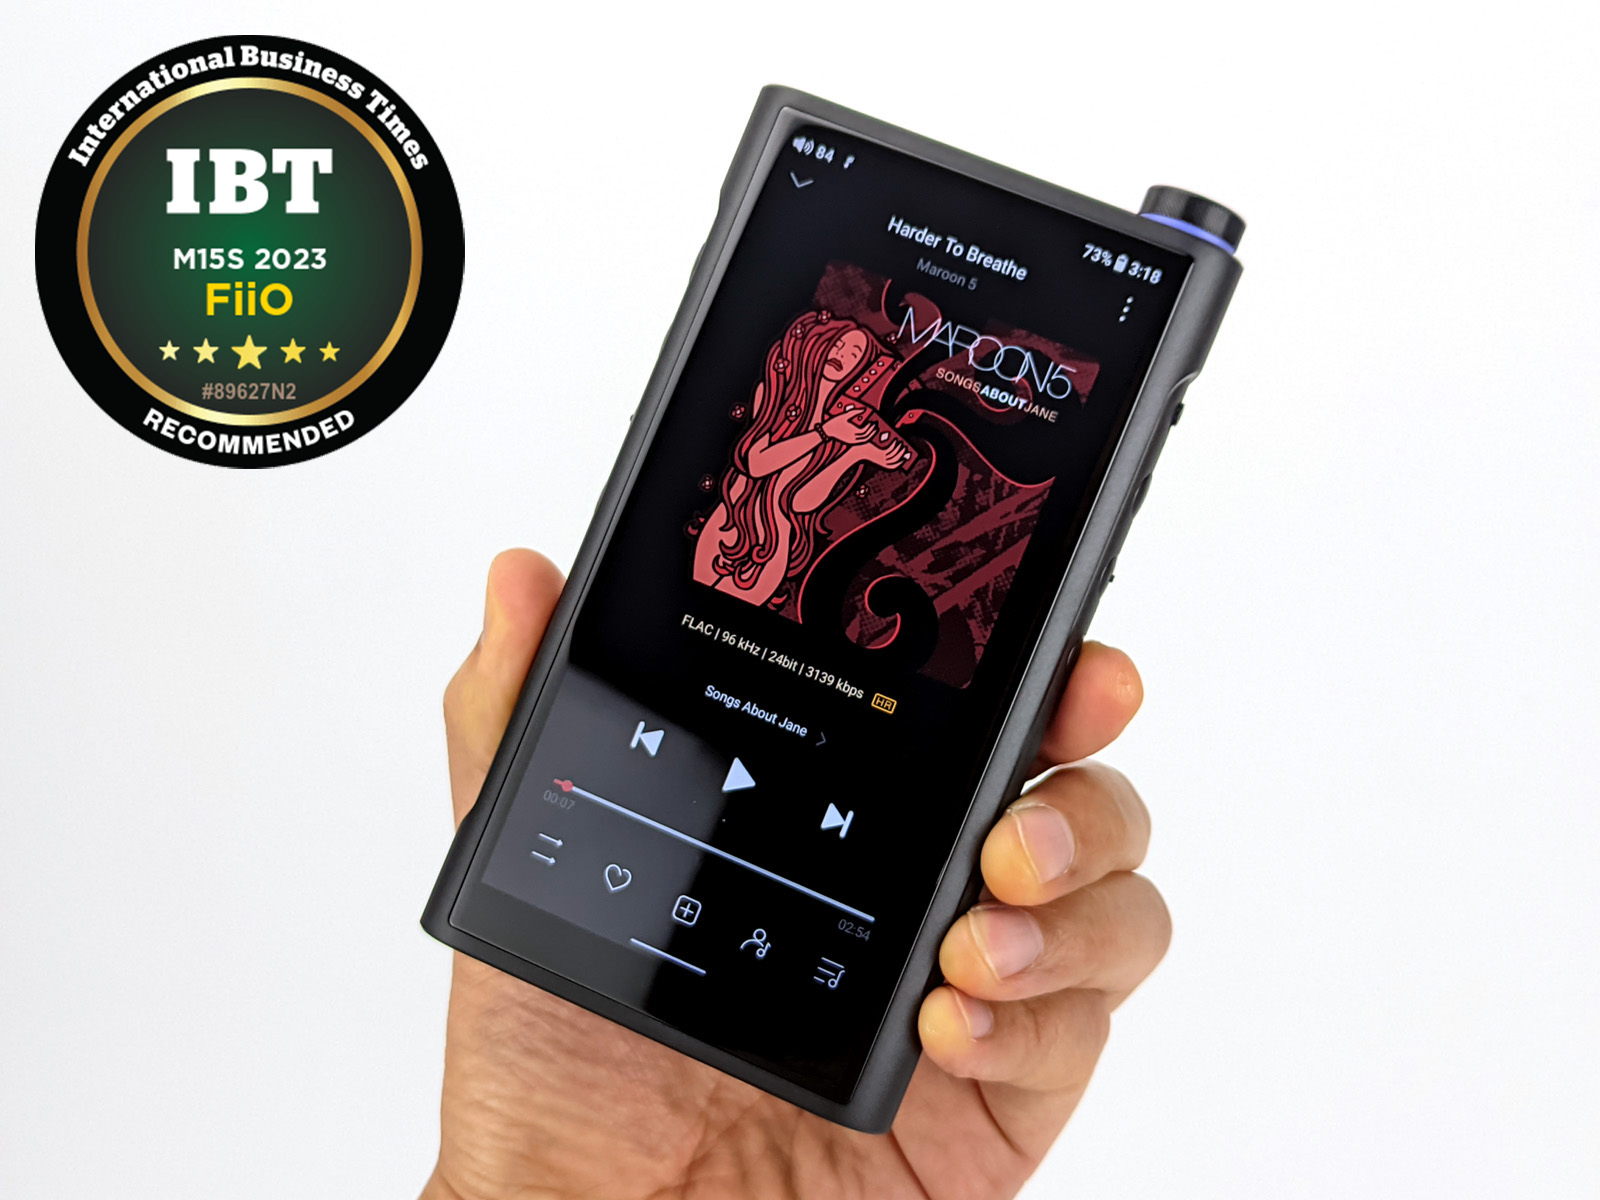 FiiO M15S Digital Audio Player Hands-on Review: Flagship Portable